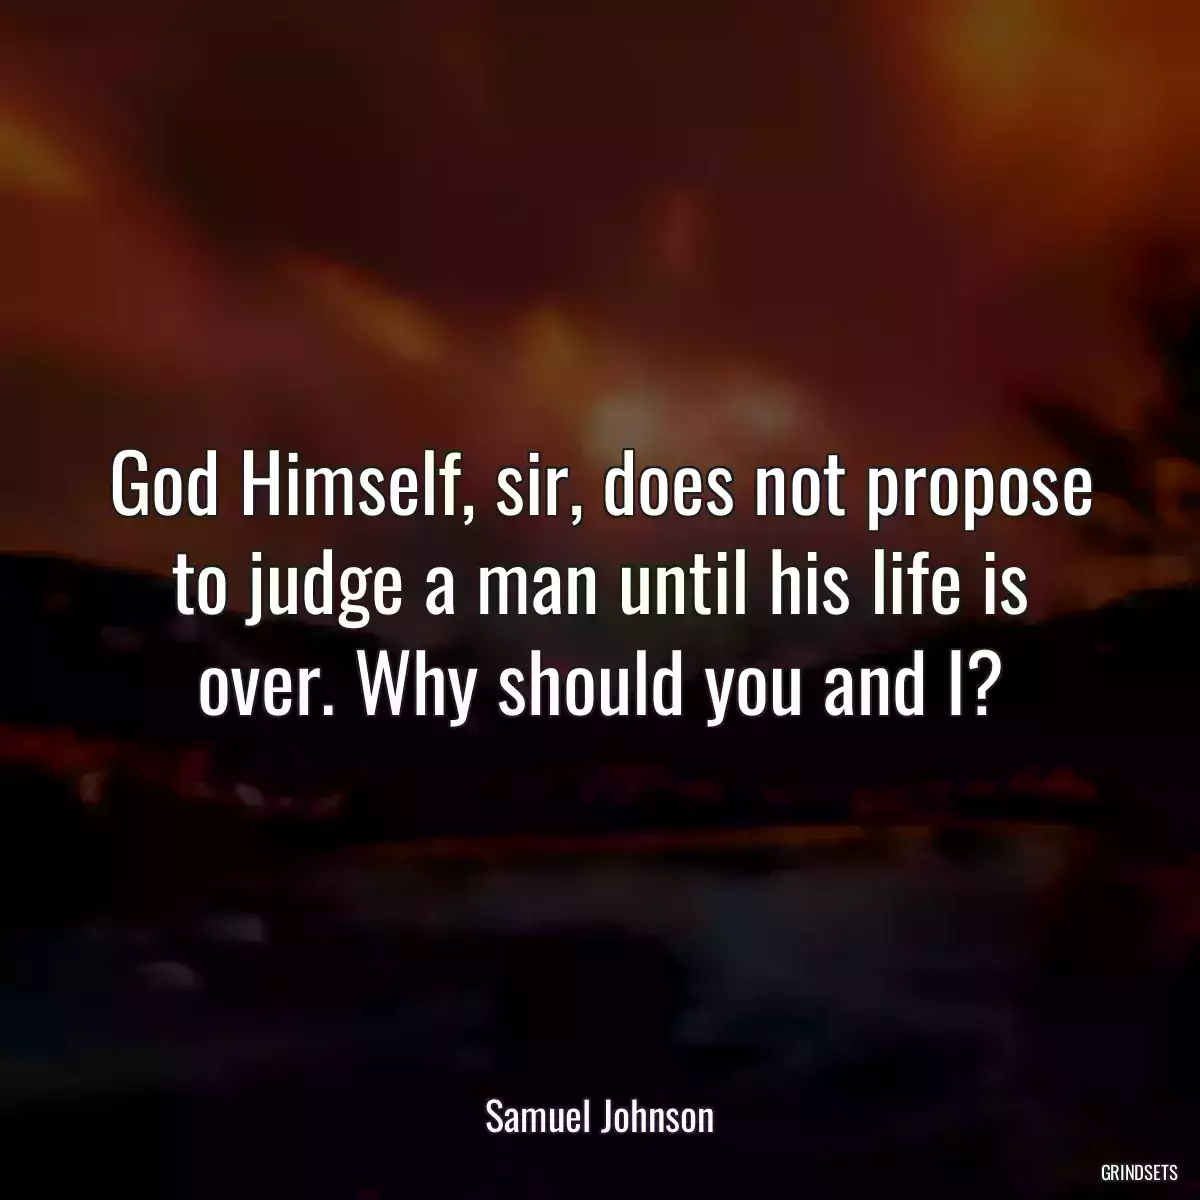 God Himself, sir, does not propose to judge a man until his life is over. Why should you and I?